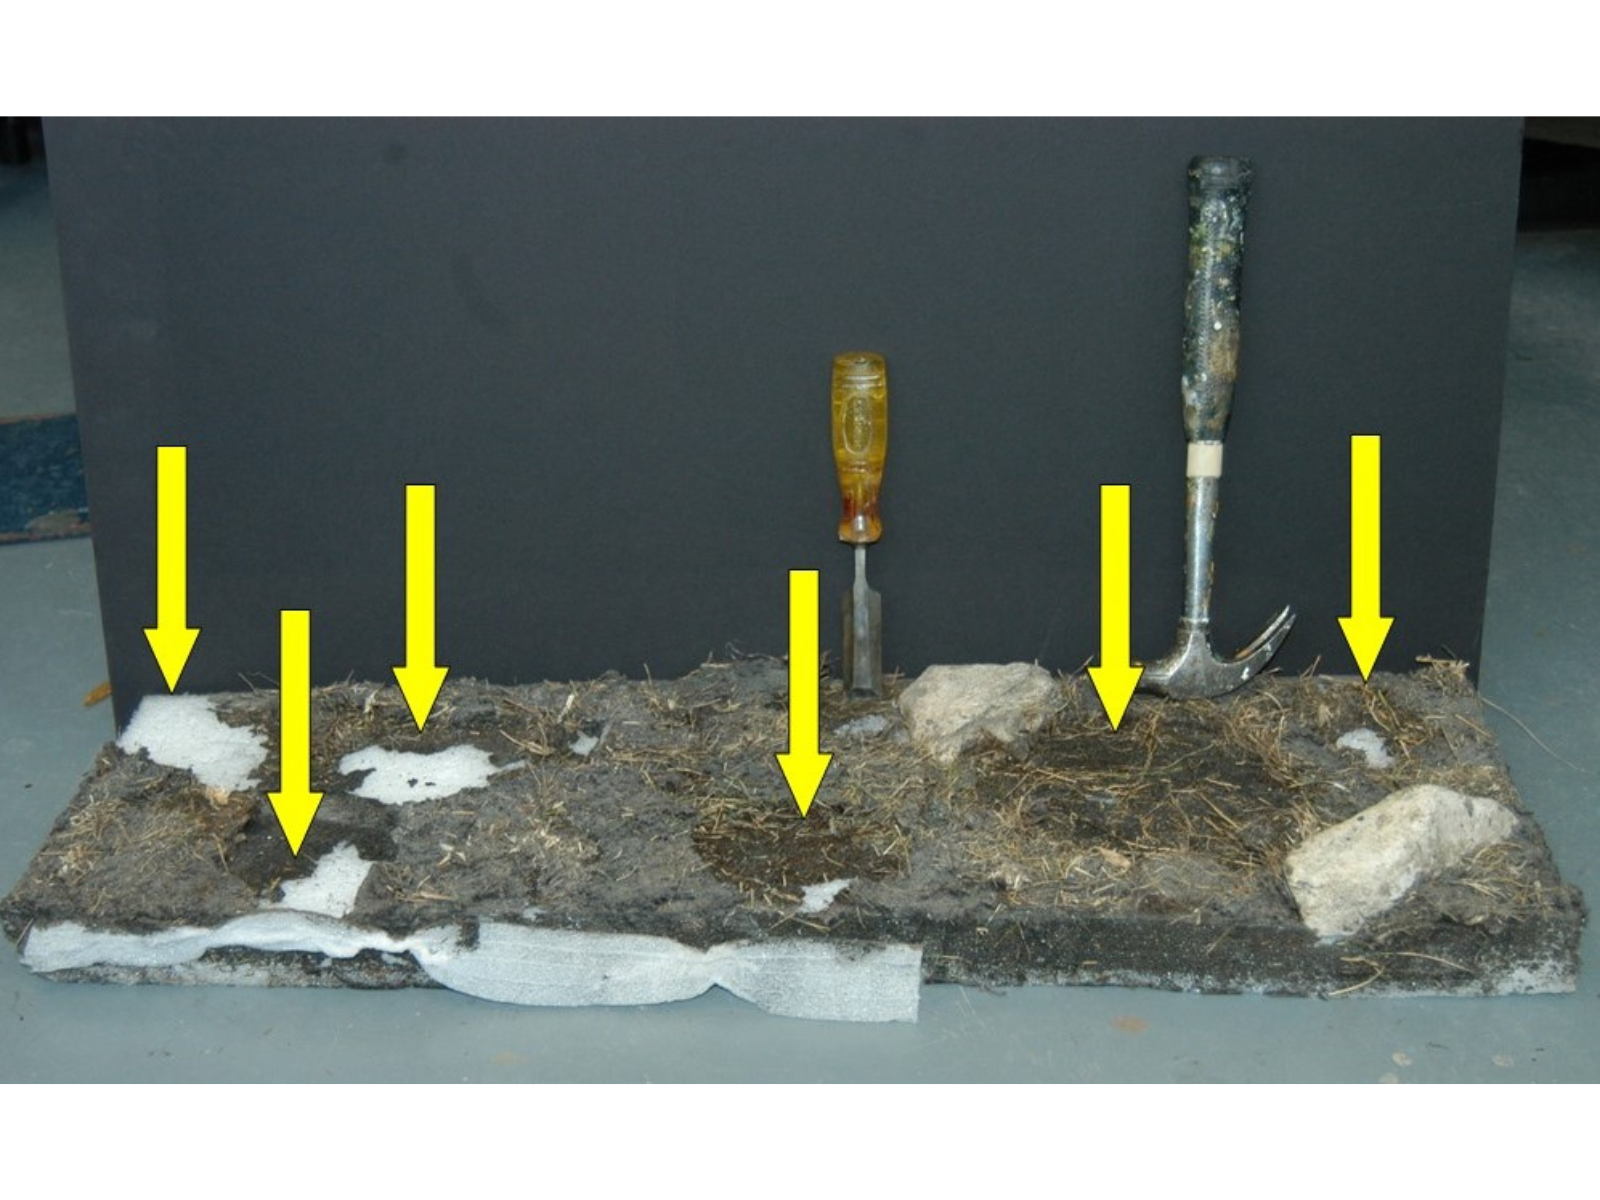 The same portion of diorama base as the previous two image, now looking even barer. In places the white ethafoam base is visible through the surrounding ground and grass areas, signified with yellow arrows. Propped up at the back of the piece are a flathead screwdriver and a hammer.